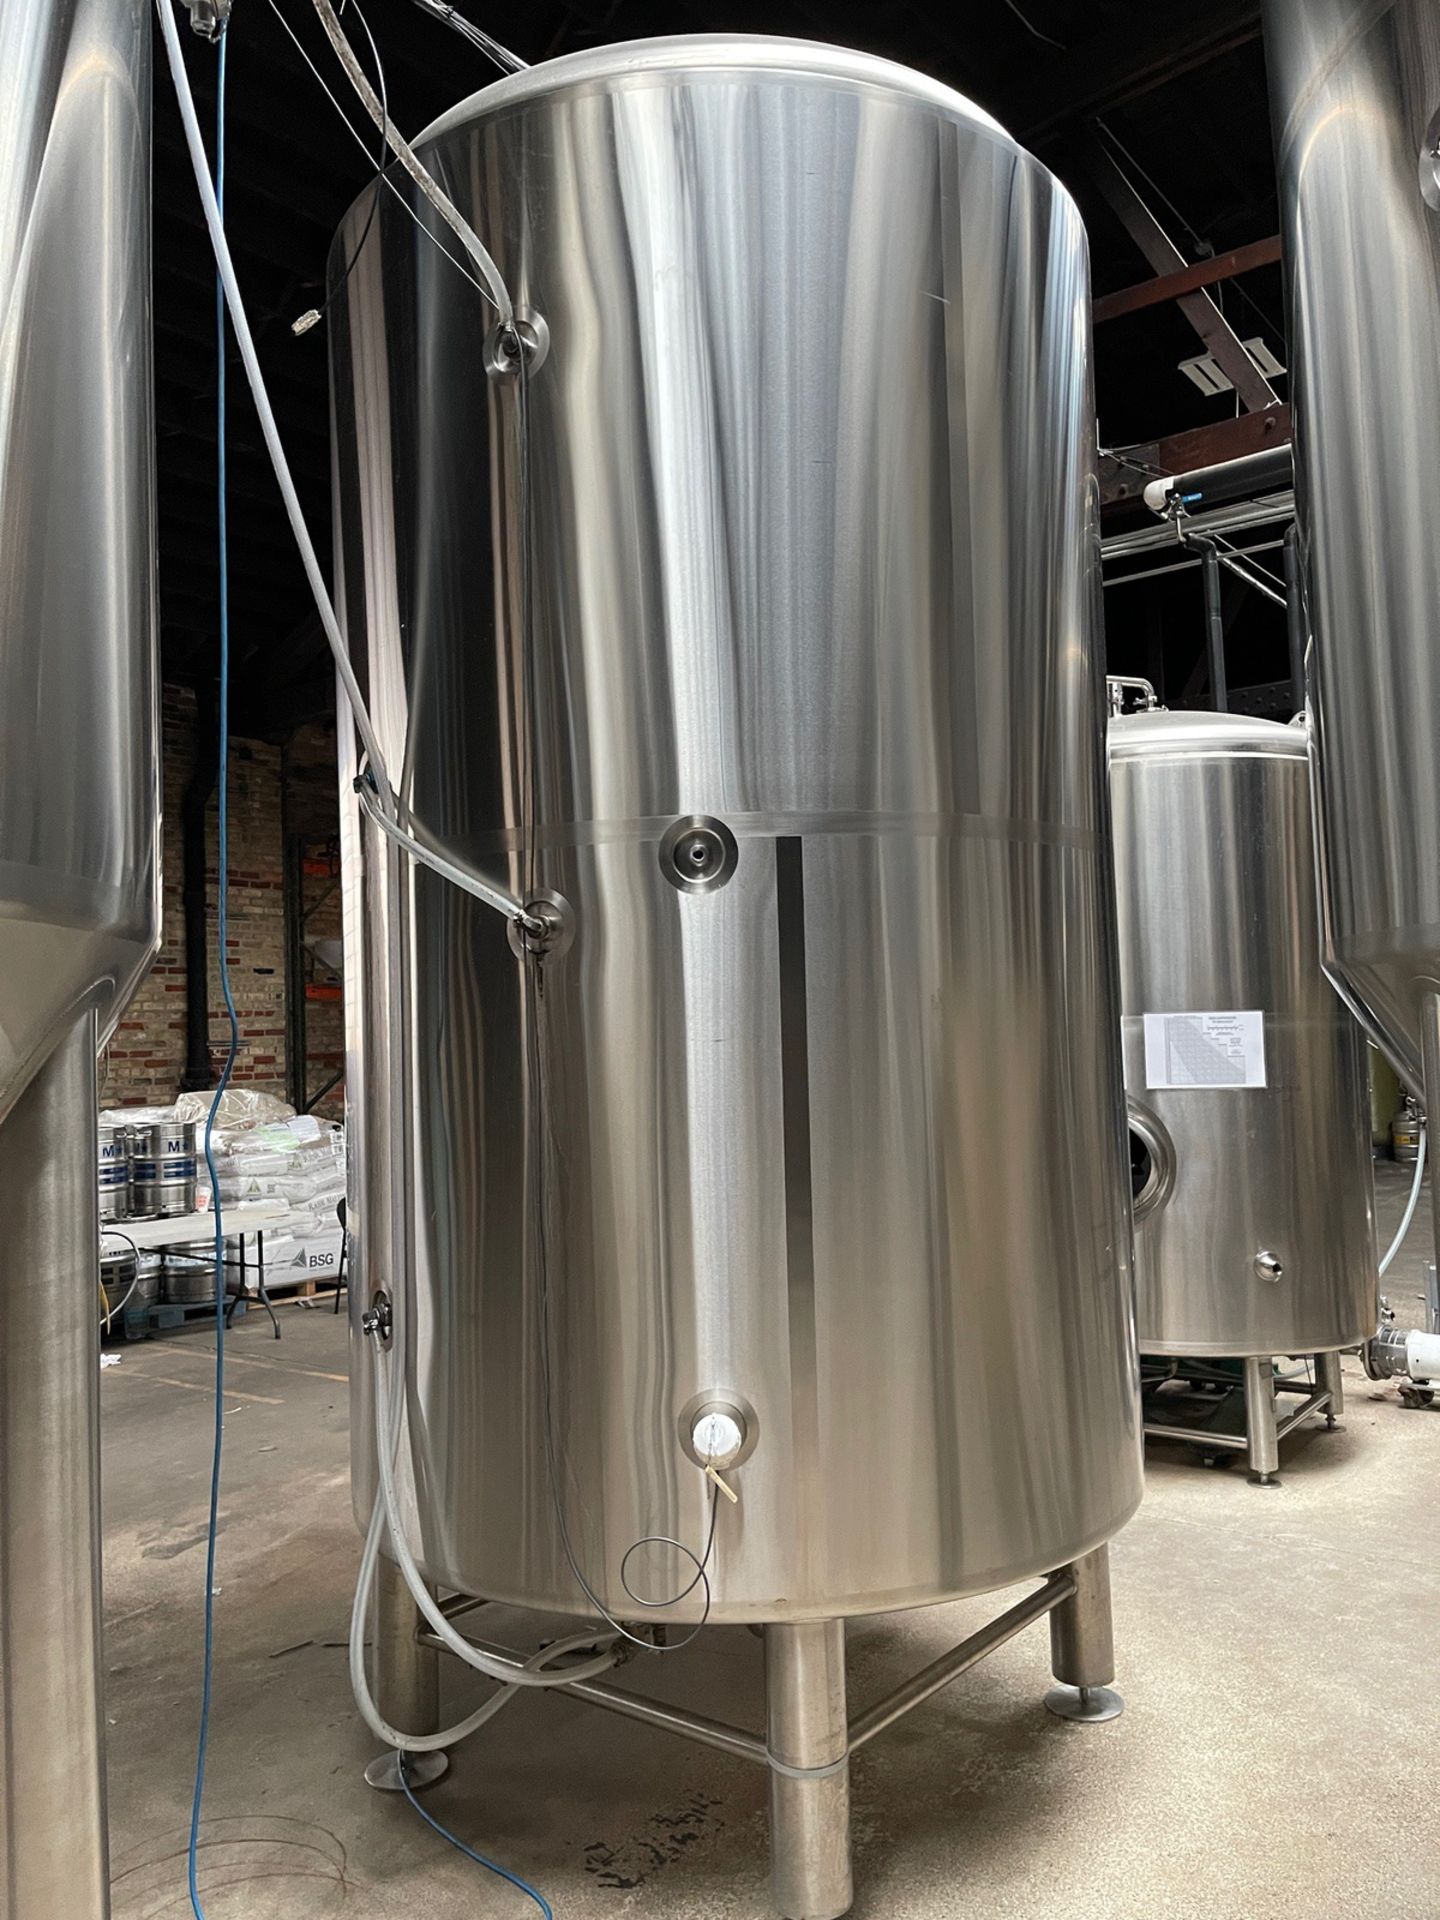 2015 - 60 BBL CAI Stainless Steel Brite Tank, Glycol Jacketed, Mandoor, Tap Ports, A | Rig Fee $1350 - Image 2 of 2